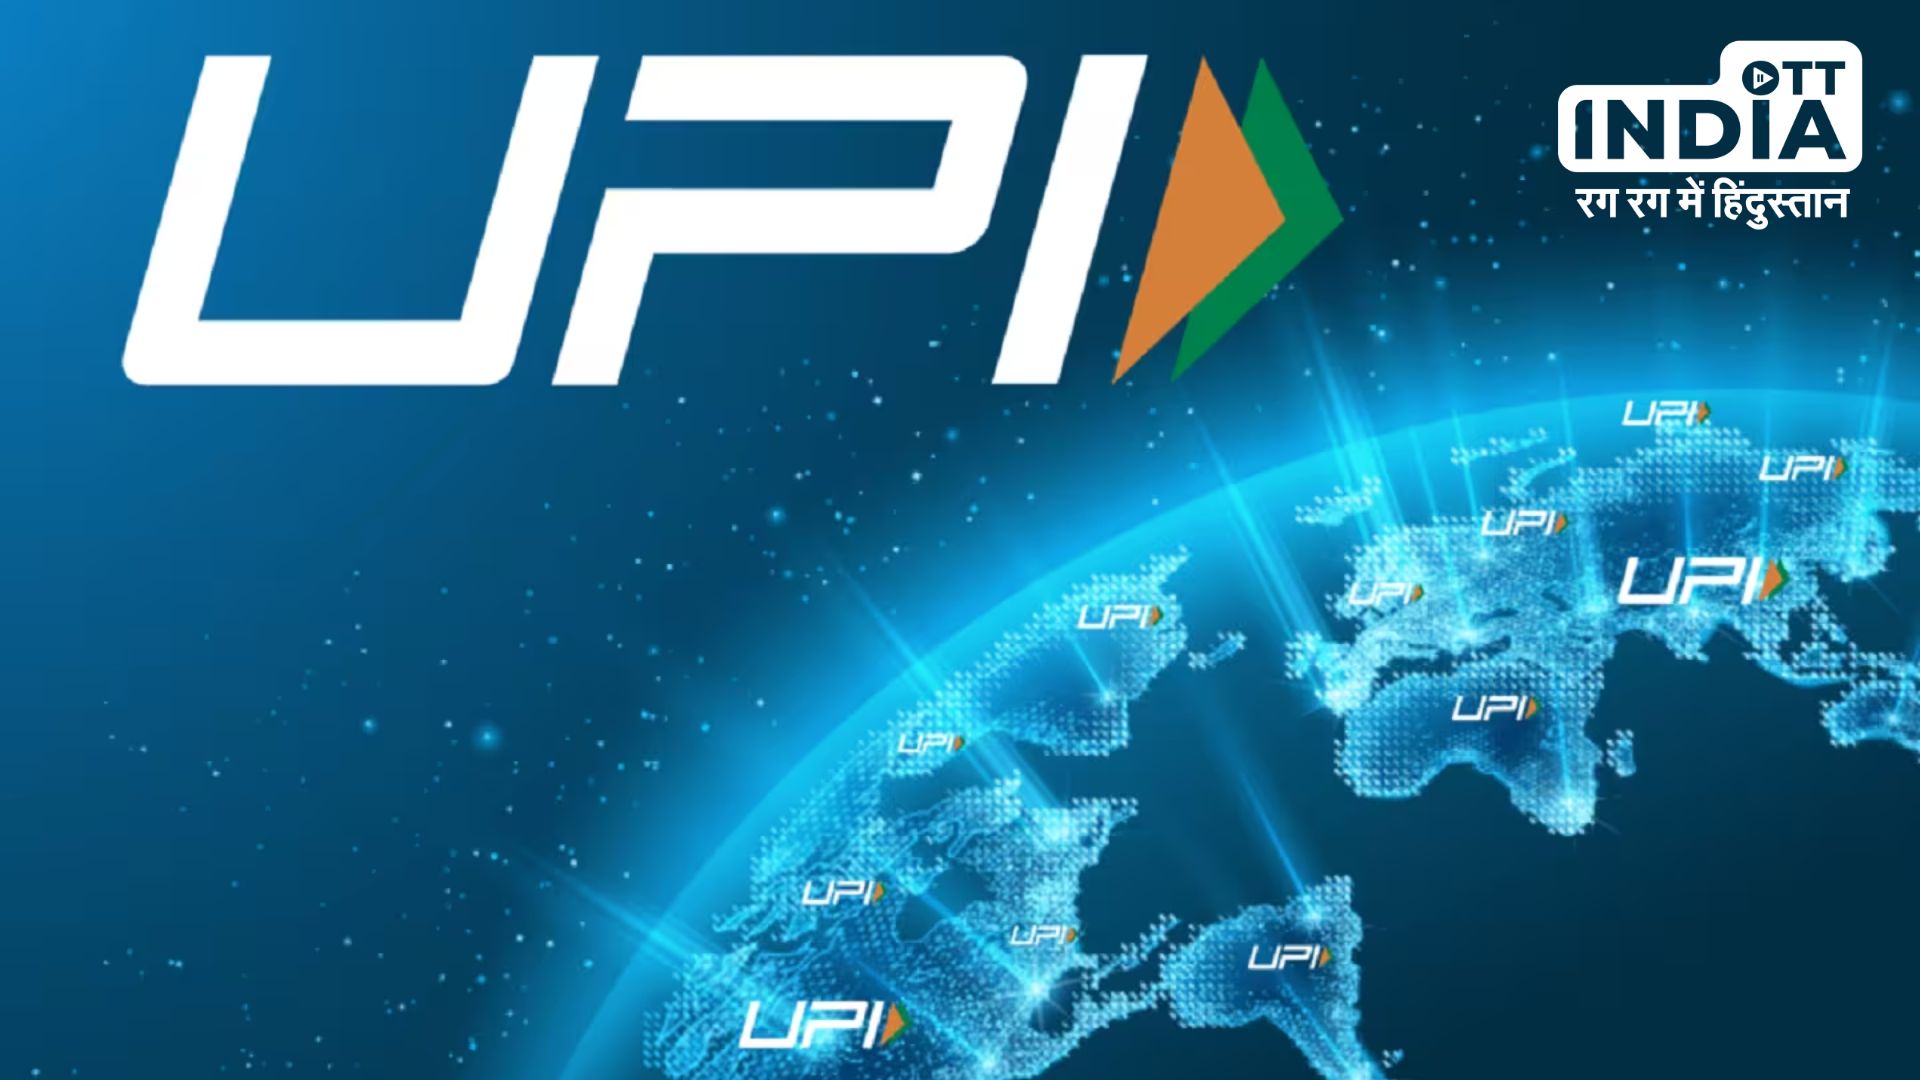 Initial discussions between India and New Zealand begin, agreement reached to use UPI